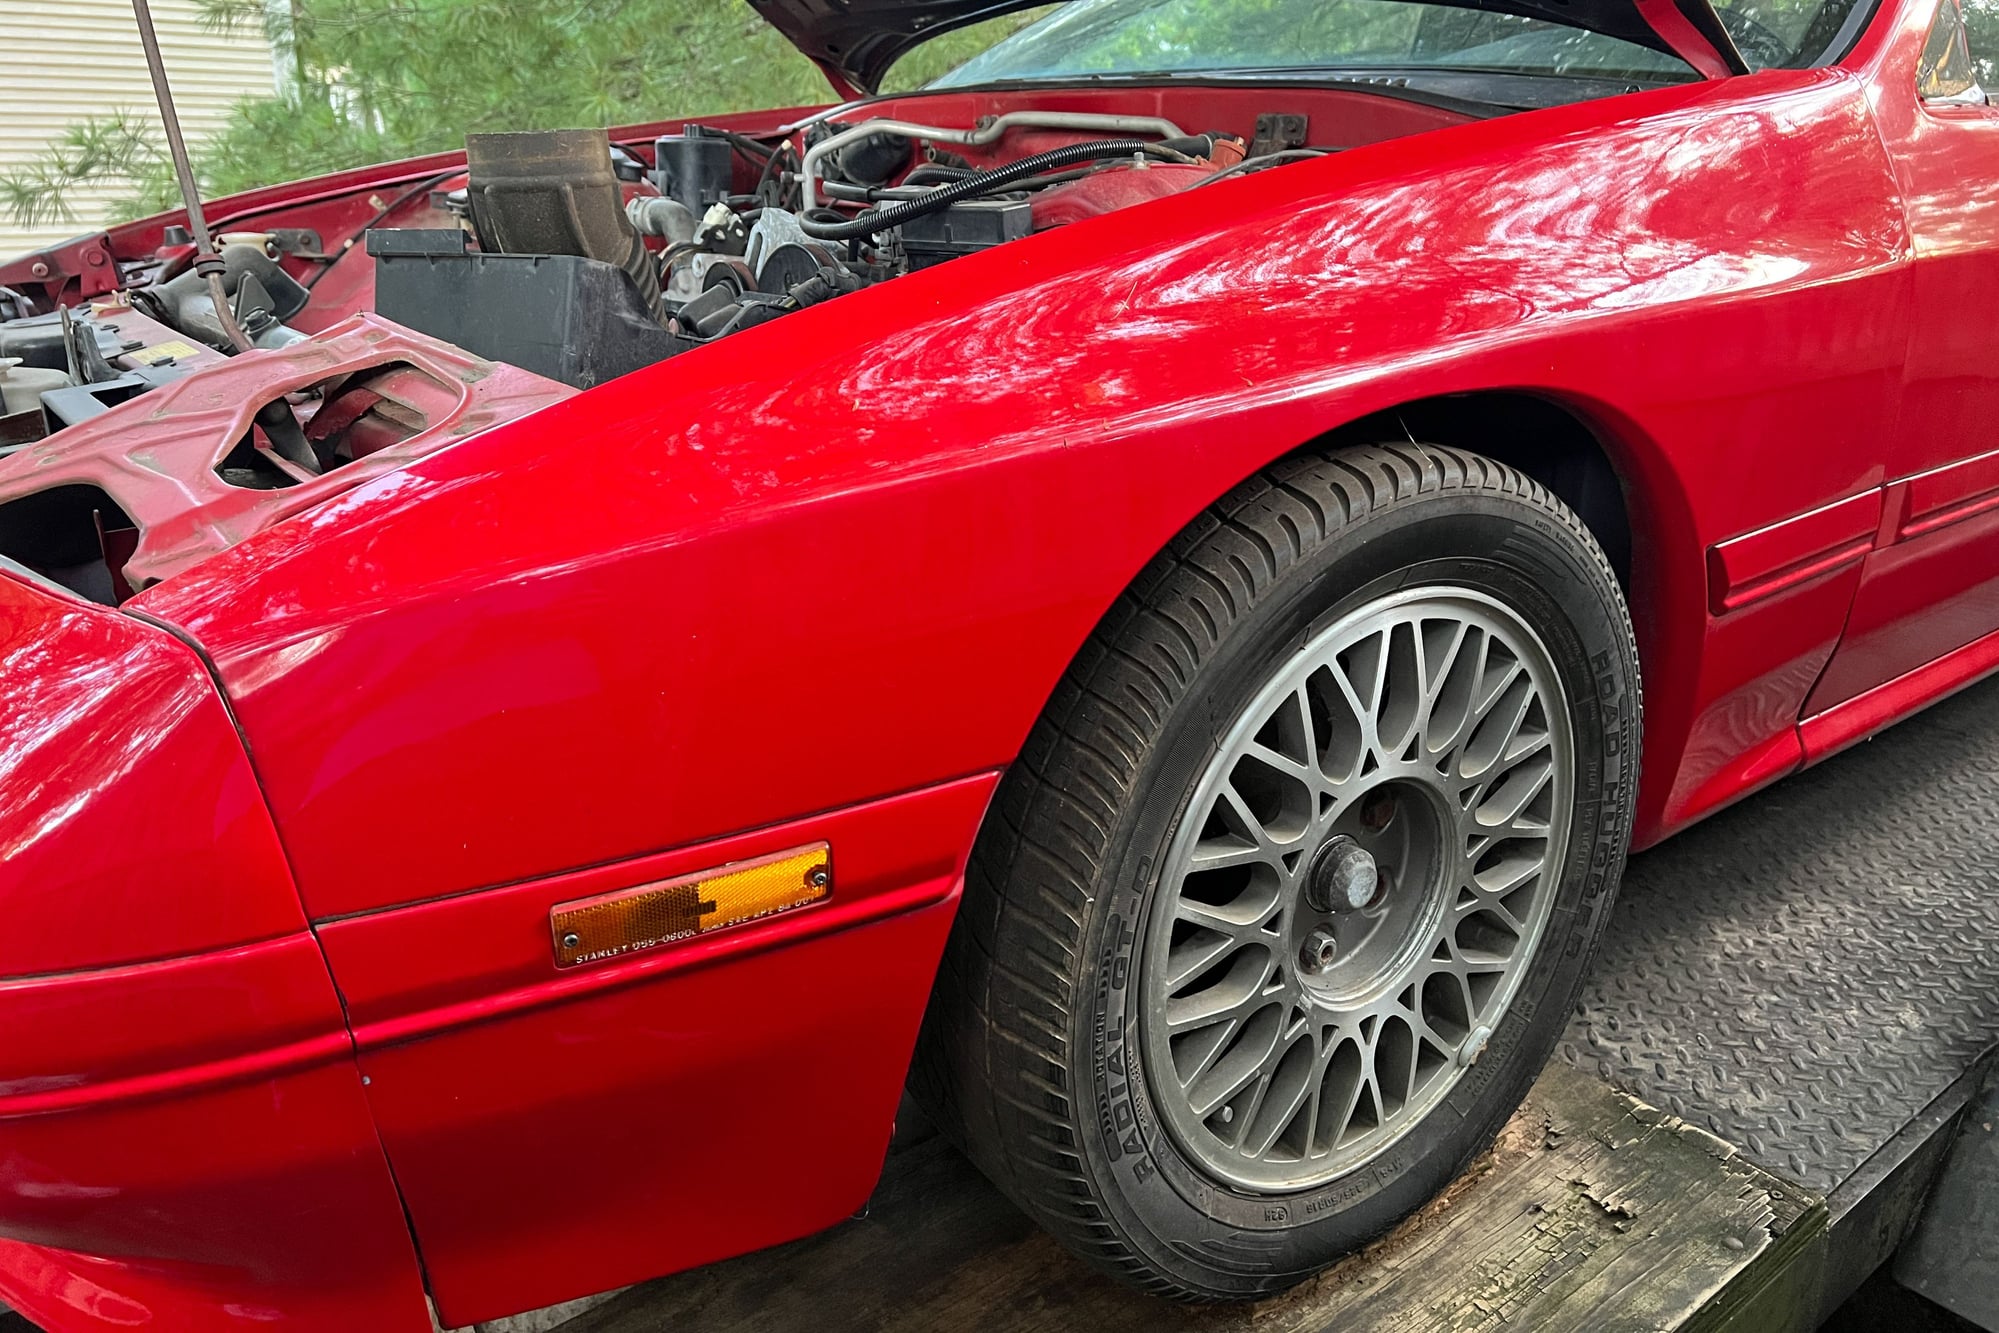 1989 Mazda RX-7 - 89 Mazda RX-7 GTUs - Restoration Project - Prefer to sell as whole - Used - VIN JM1FC3318K0703839 - Other - 2WD - Manual - Coupe - Red - Bowie, MD 20716, United States